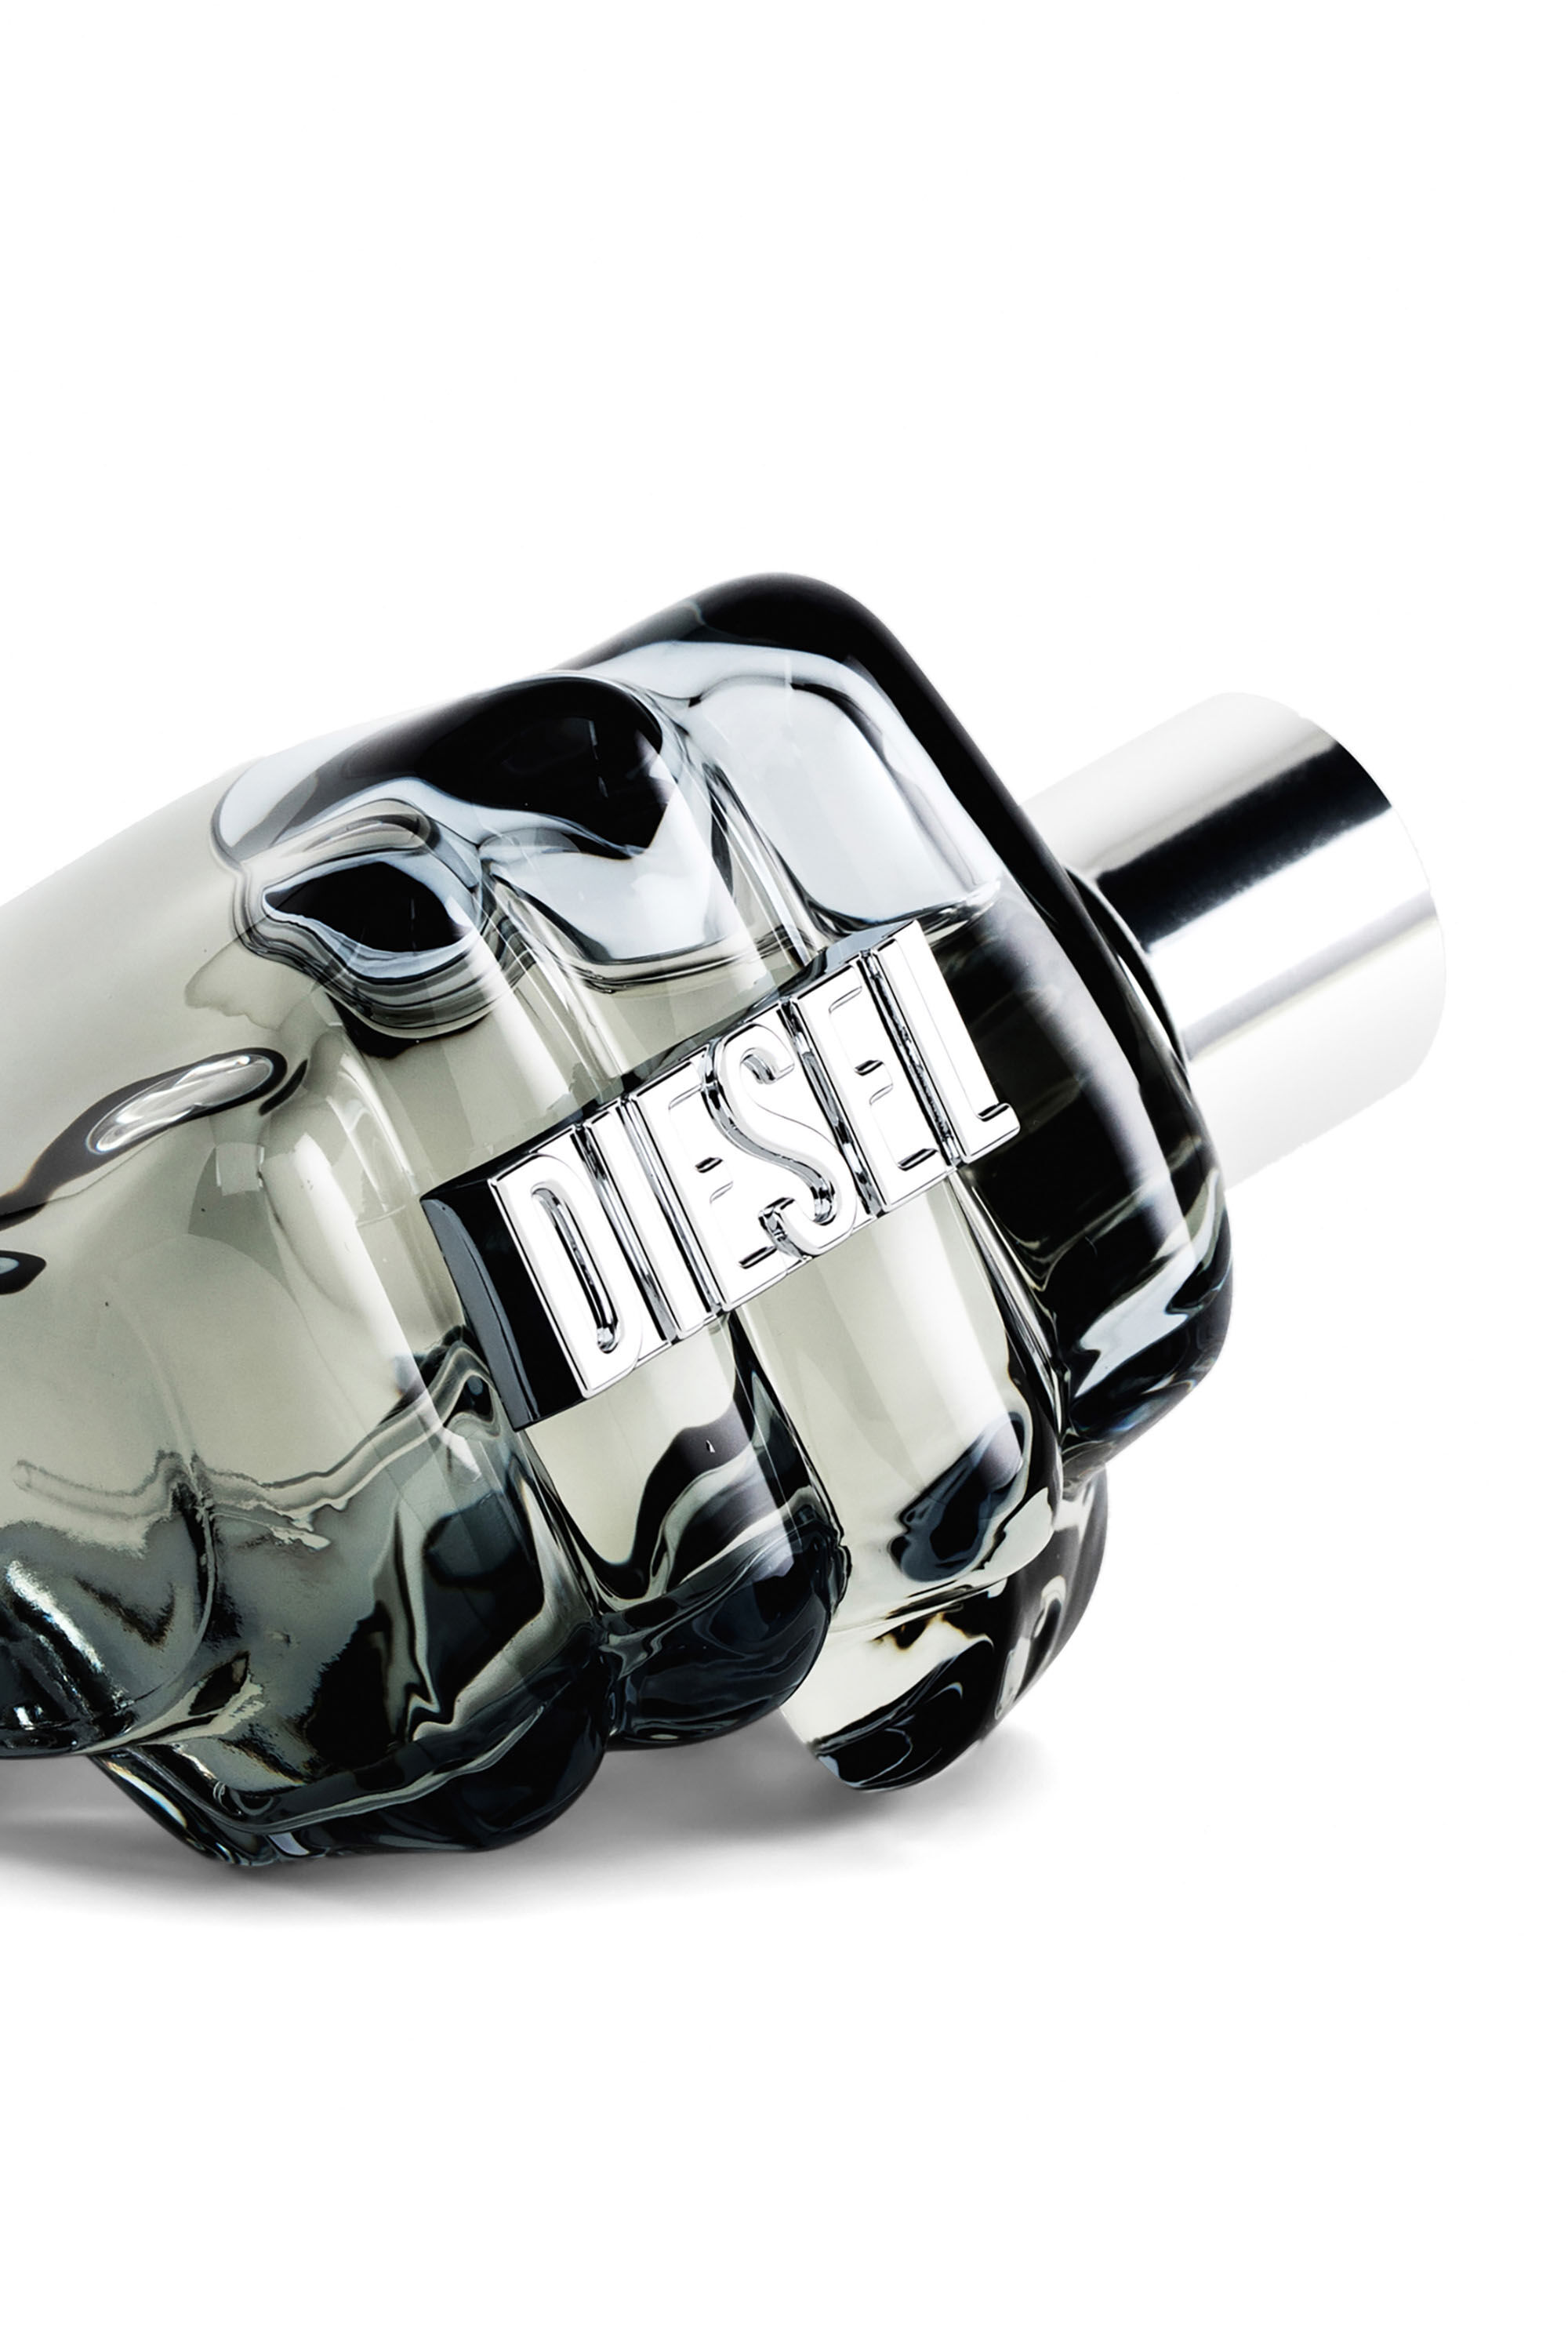 Diesel - ONLY THE BRAVE 75ML , Blanco - Image 2